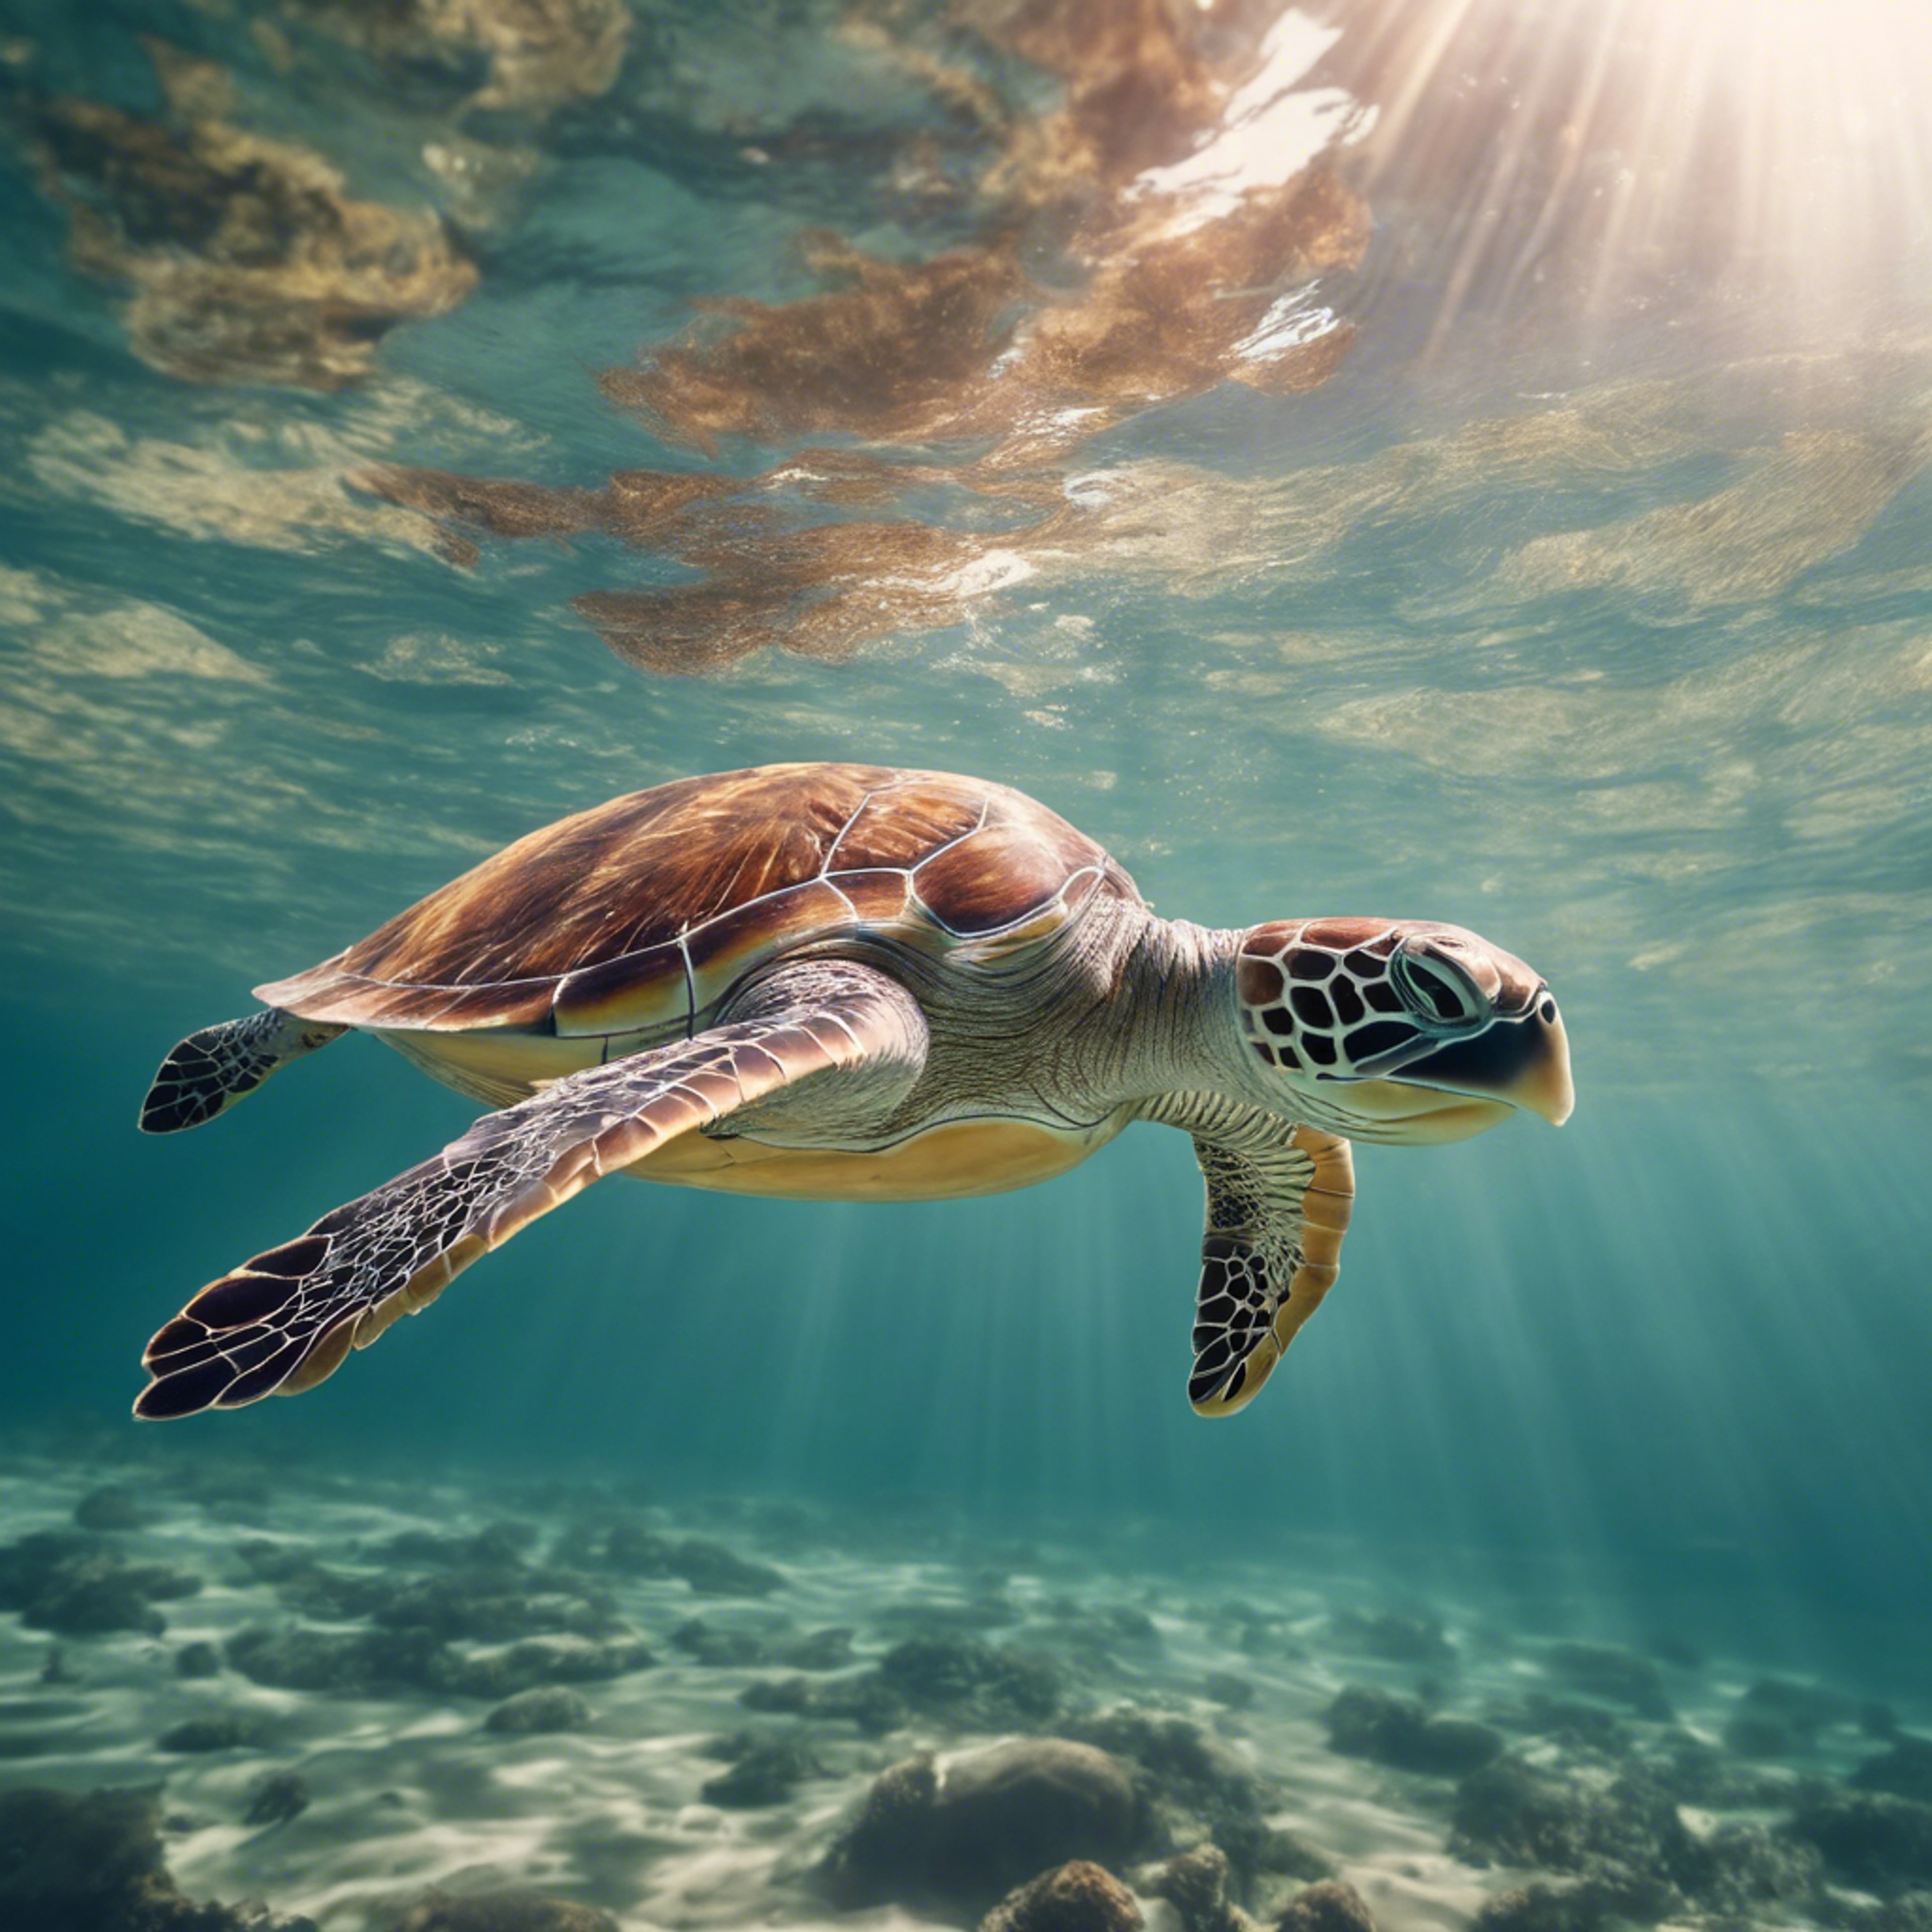 Sea turtle swimming leisurely in the ocean, with the sun penetrating the surface of the water above.壁紙[52b0564e310d4ce7b781]